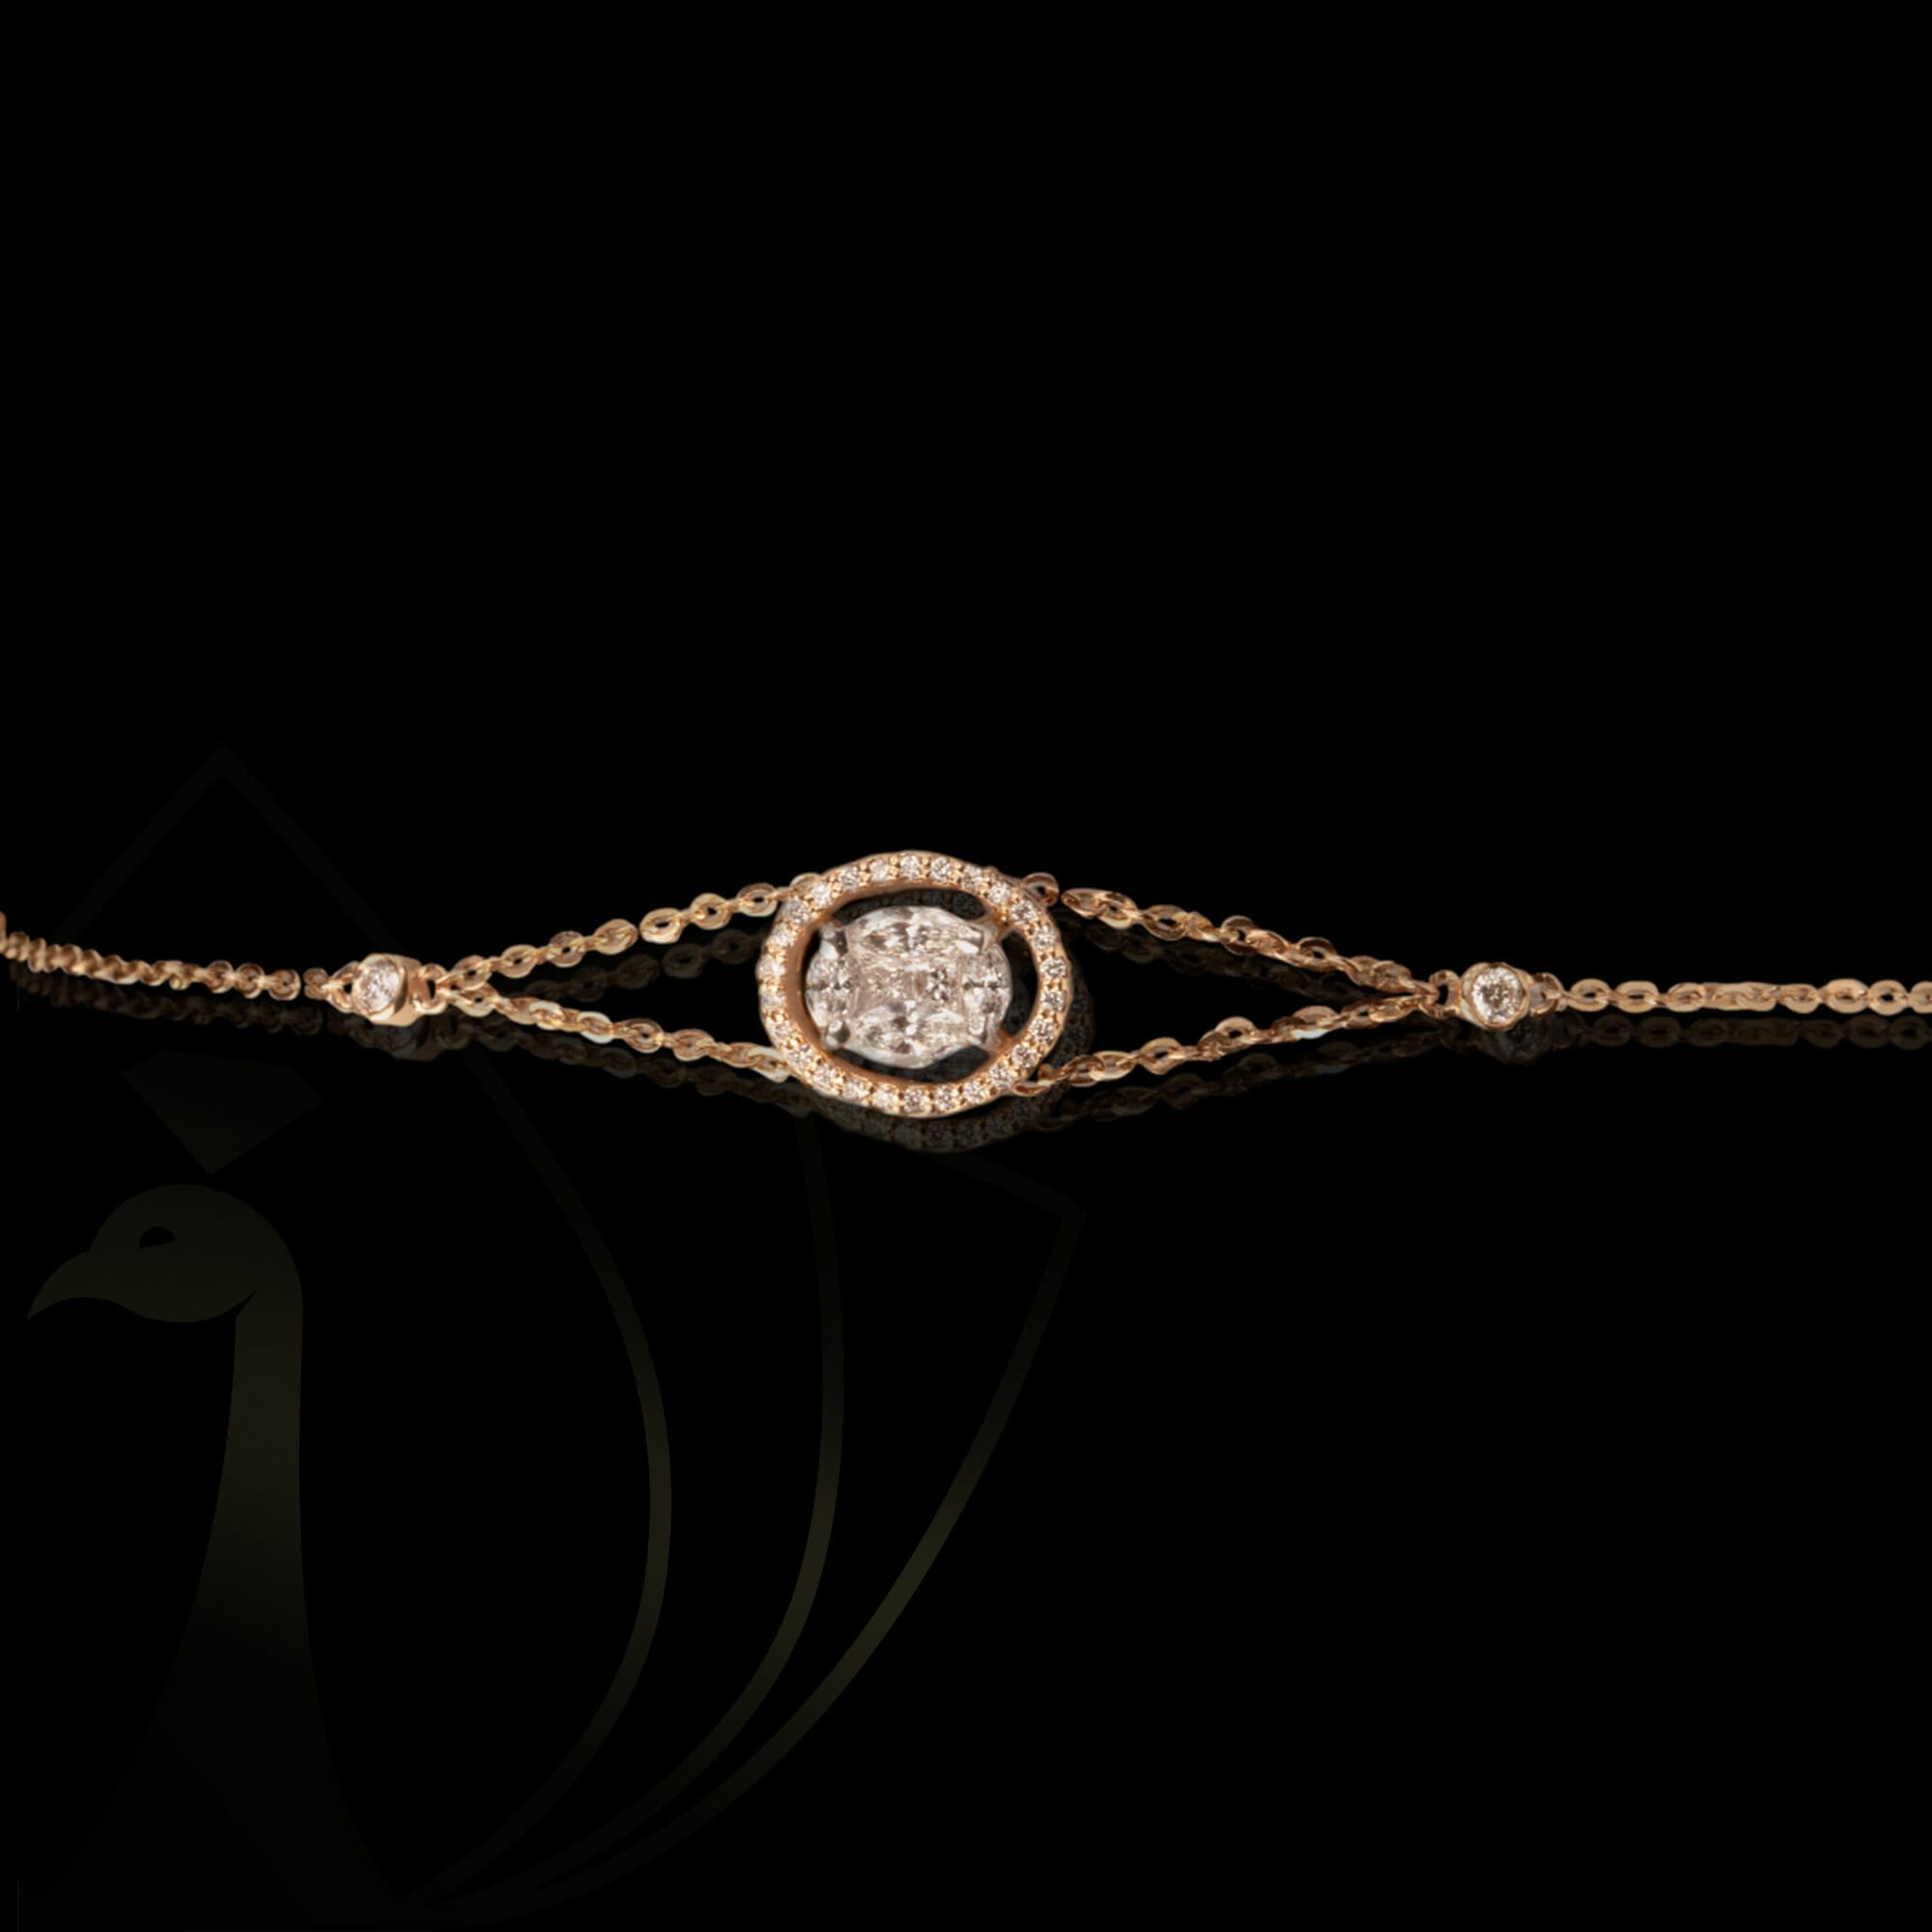 Crowning Glory Diamond Bracelet from our exclusive Gulz Collection